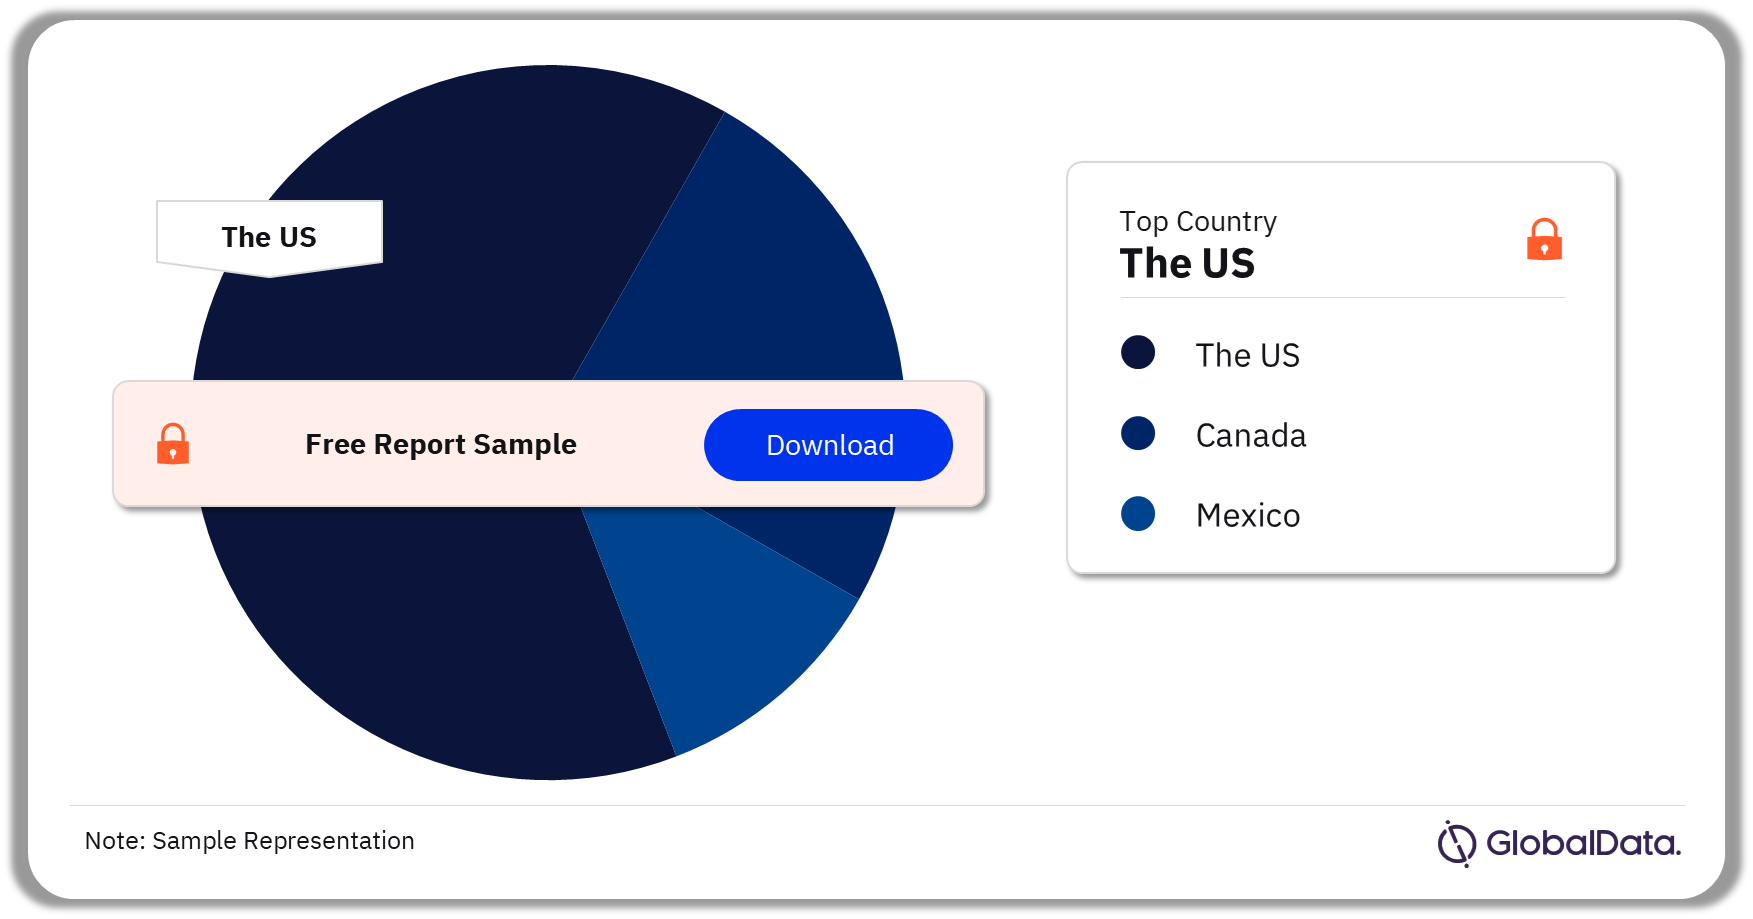 North America Shoulder Replacement Procedures Market Analysis by Countries, 2022 (%)